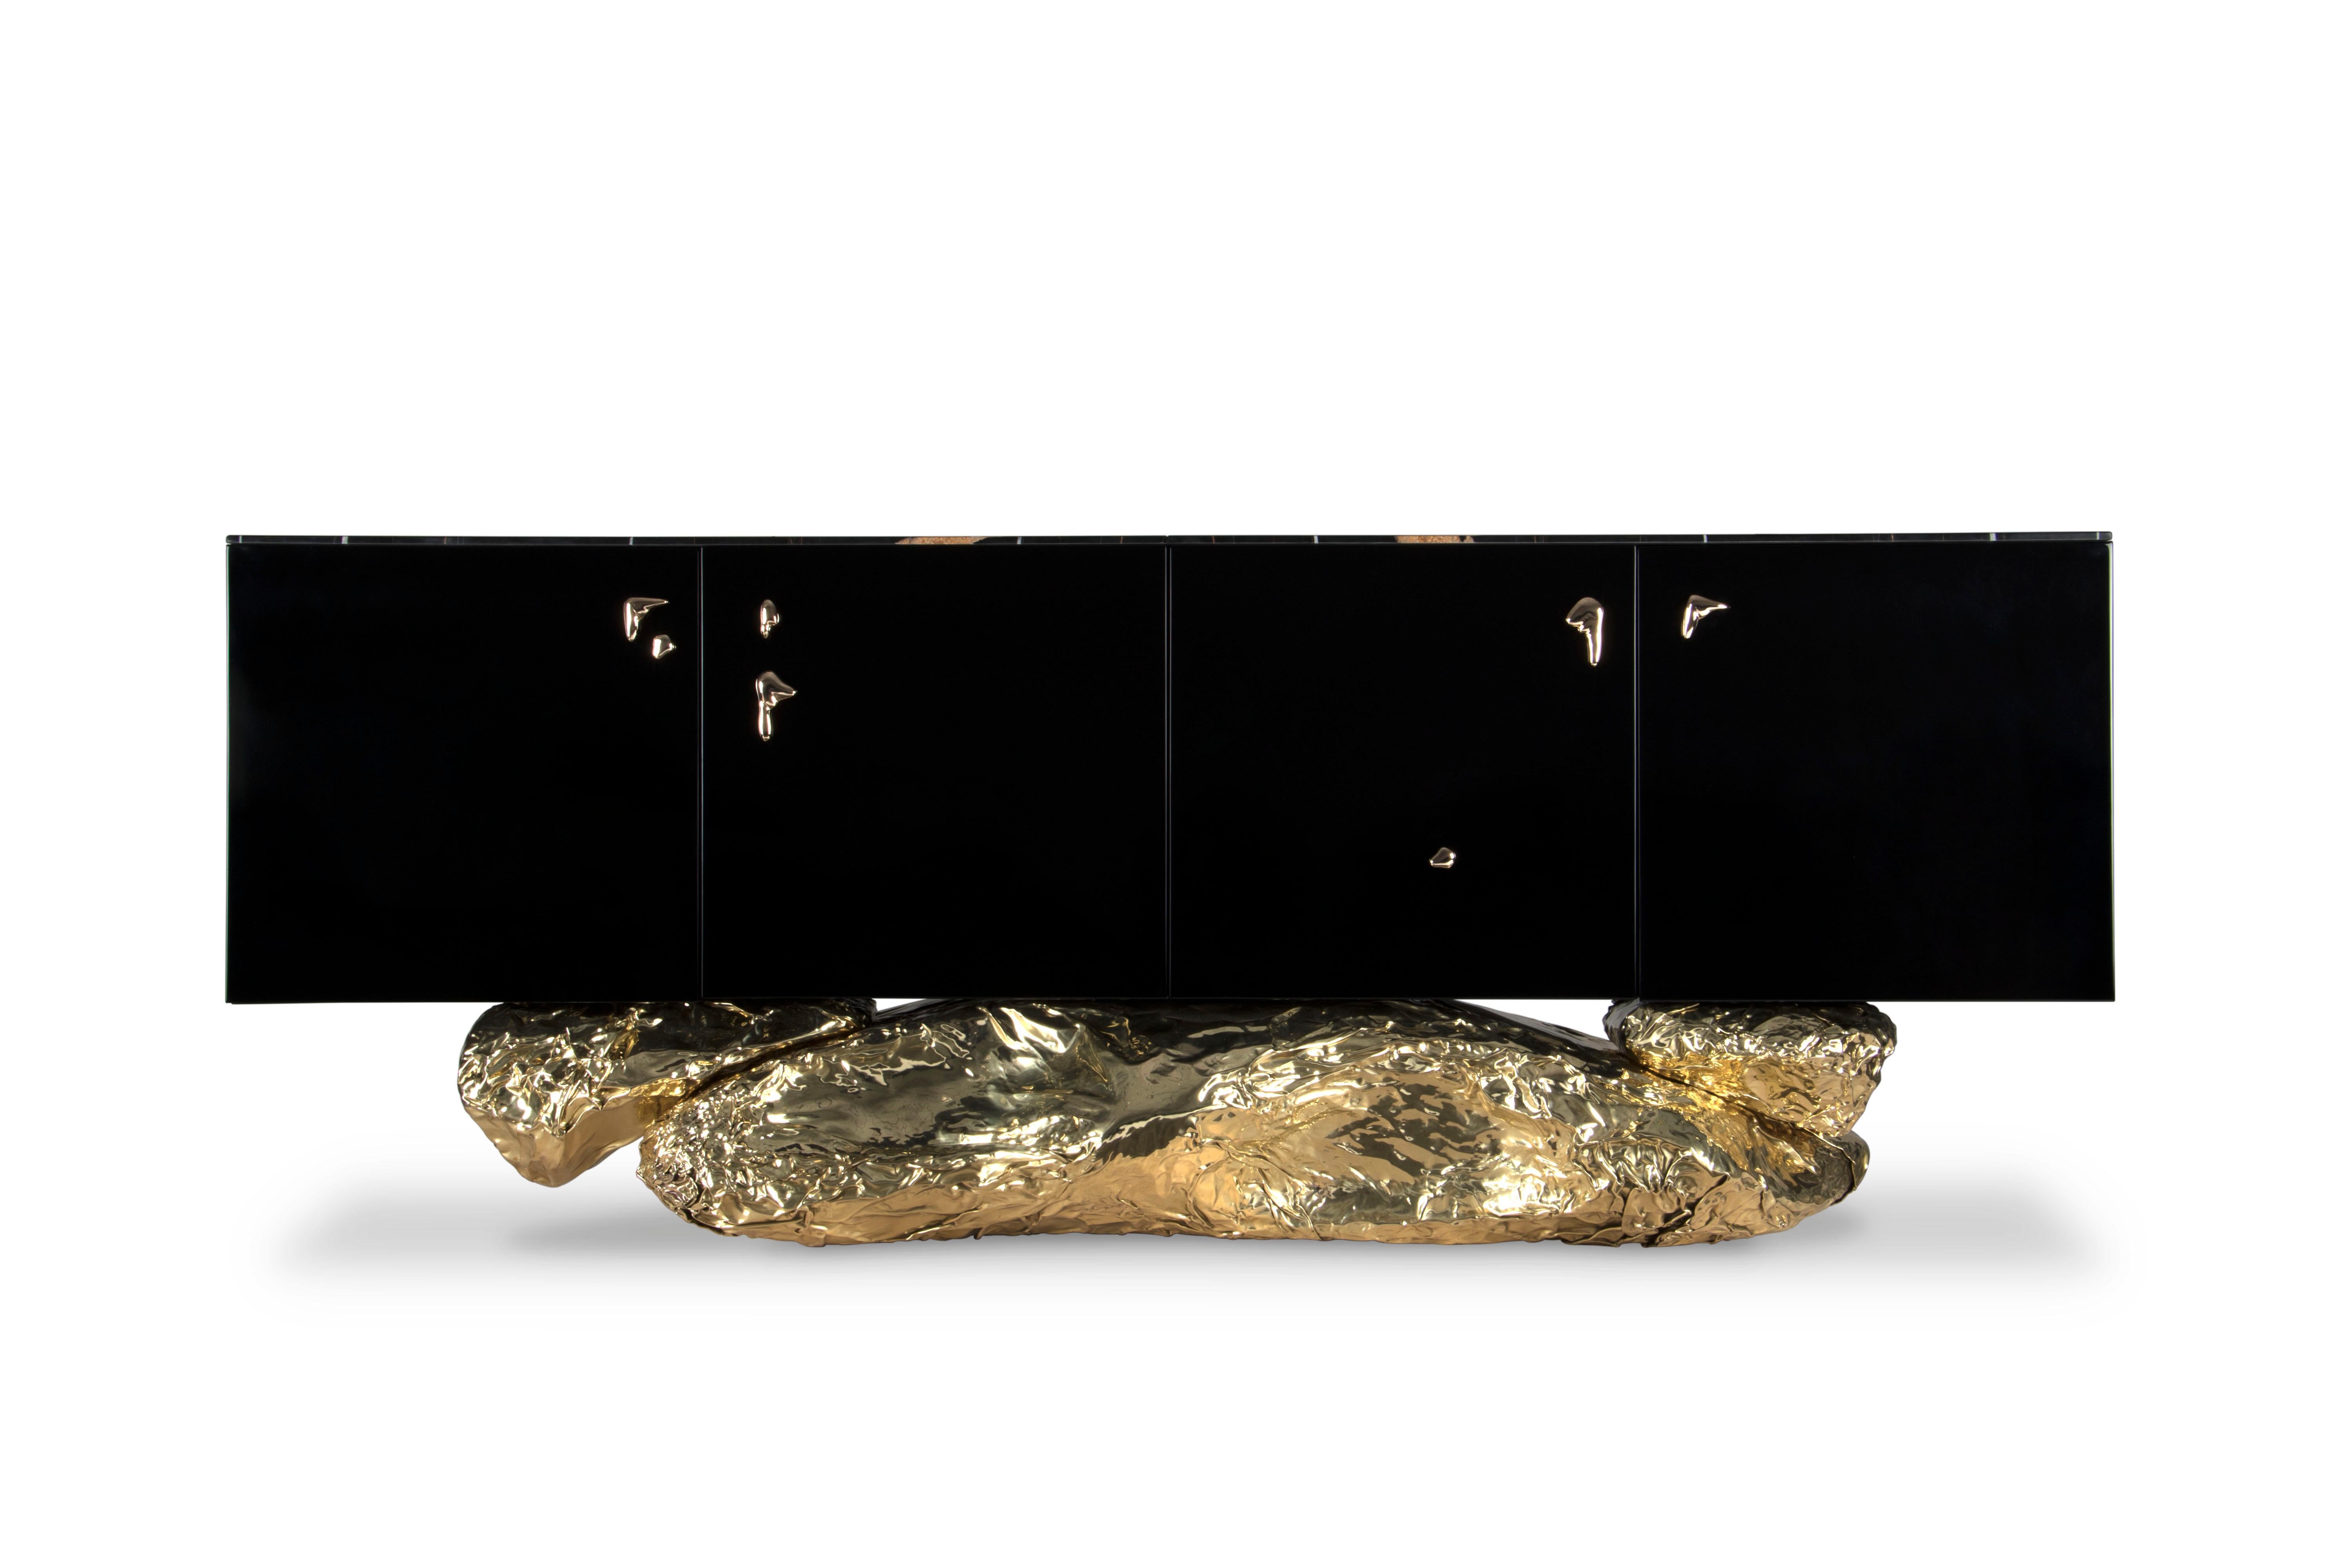 Modern Contemporary Angra Black with Brass Base Sideboard by Boca do Lobo

Modern Contemporary Angra Black with Brass Base Sideboard is a black and gold sideboard, with a sharped body fully covered in black high gloss,  and it gently lies in an